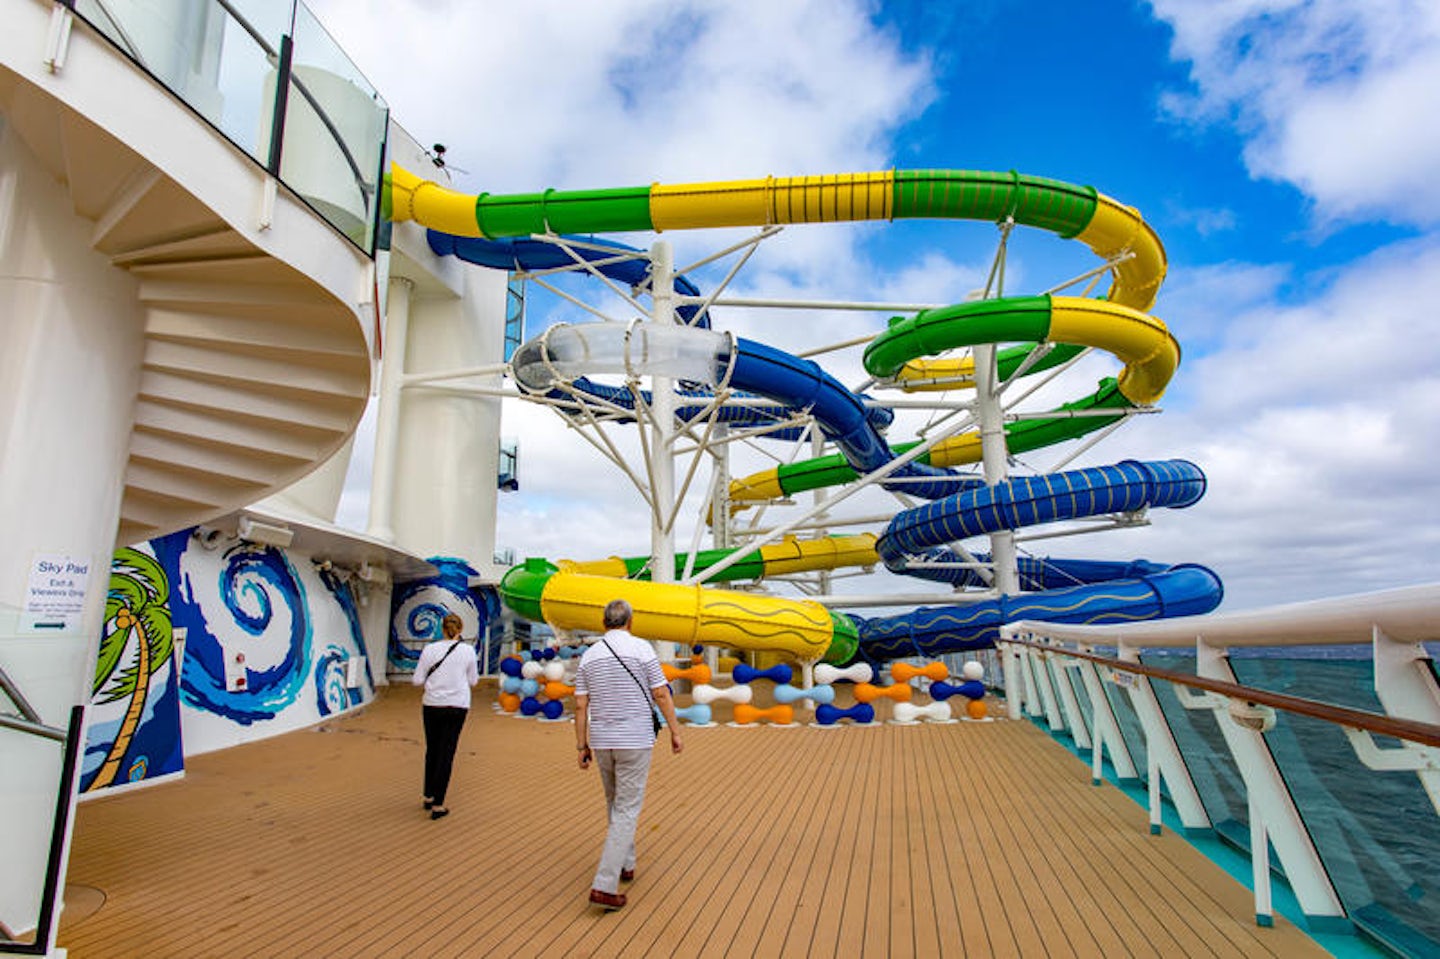 The Perfect Storm on Independence of the Seas